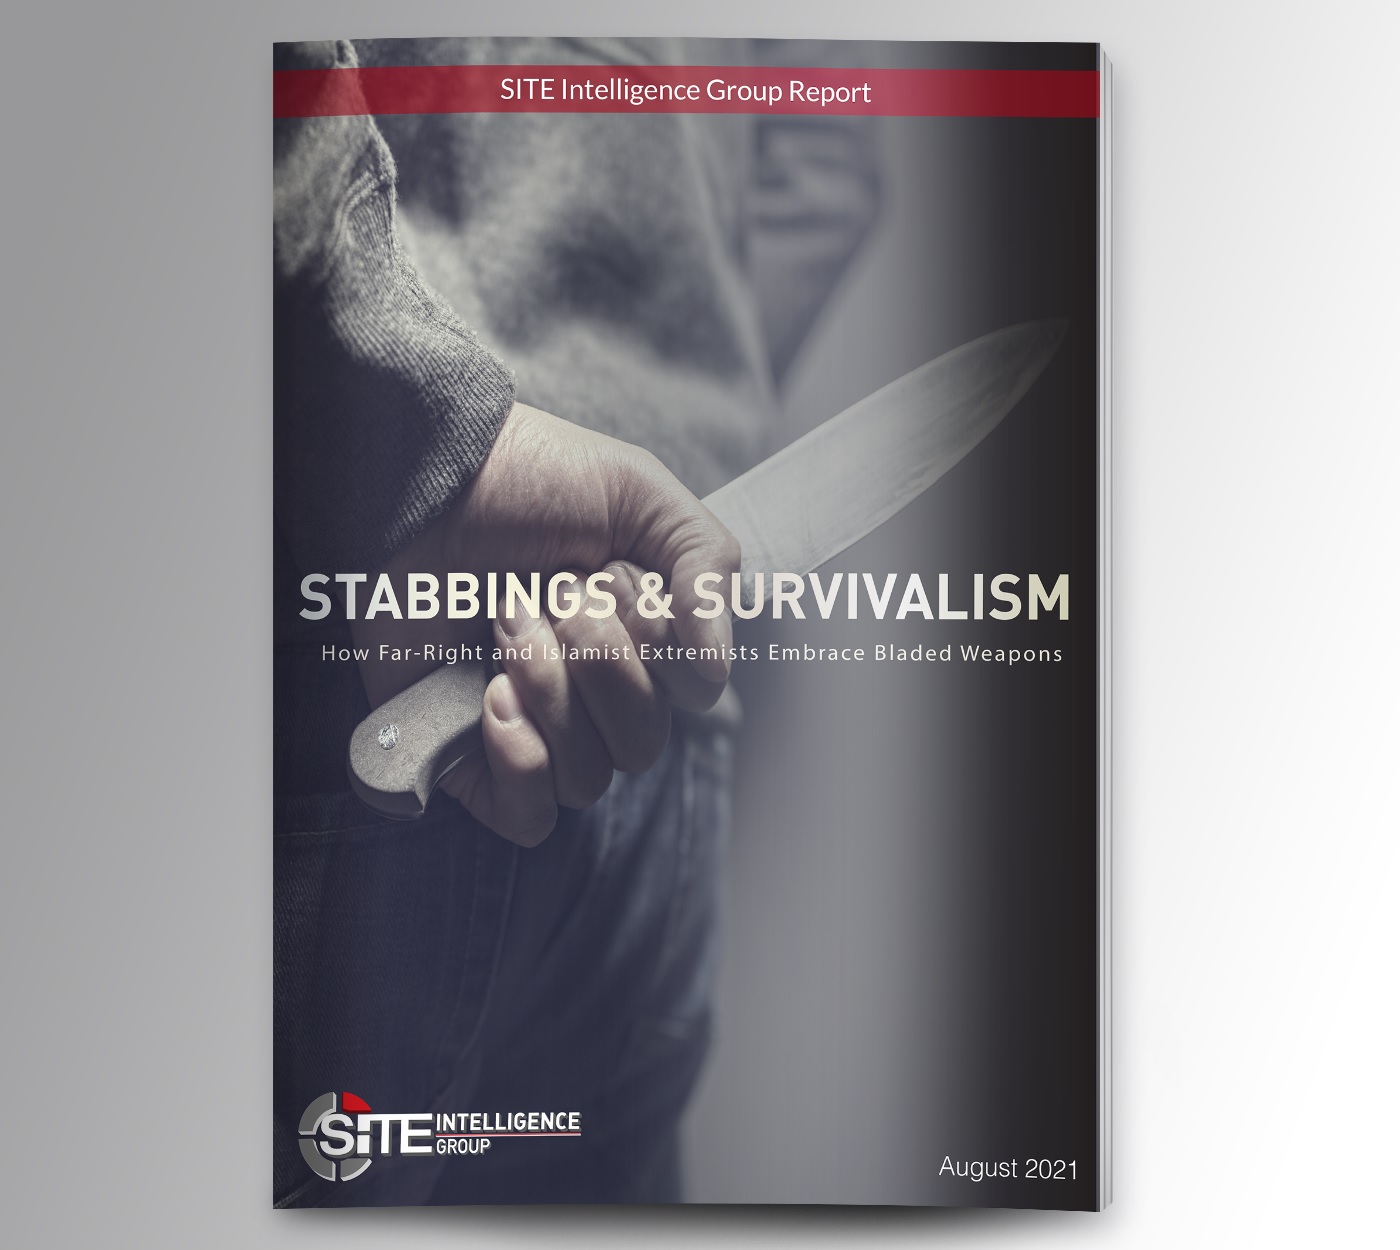 GuideTracker Special Report: “Stabbings and Survivalism - How Far-Right and Islamist Extremists Embrace Bladed Weapons”